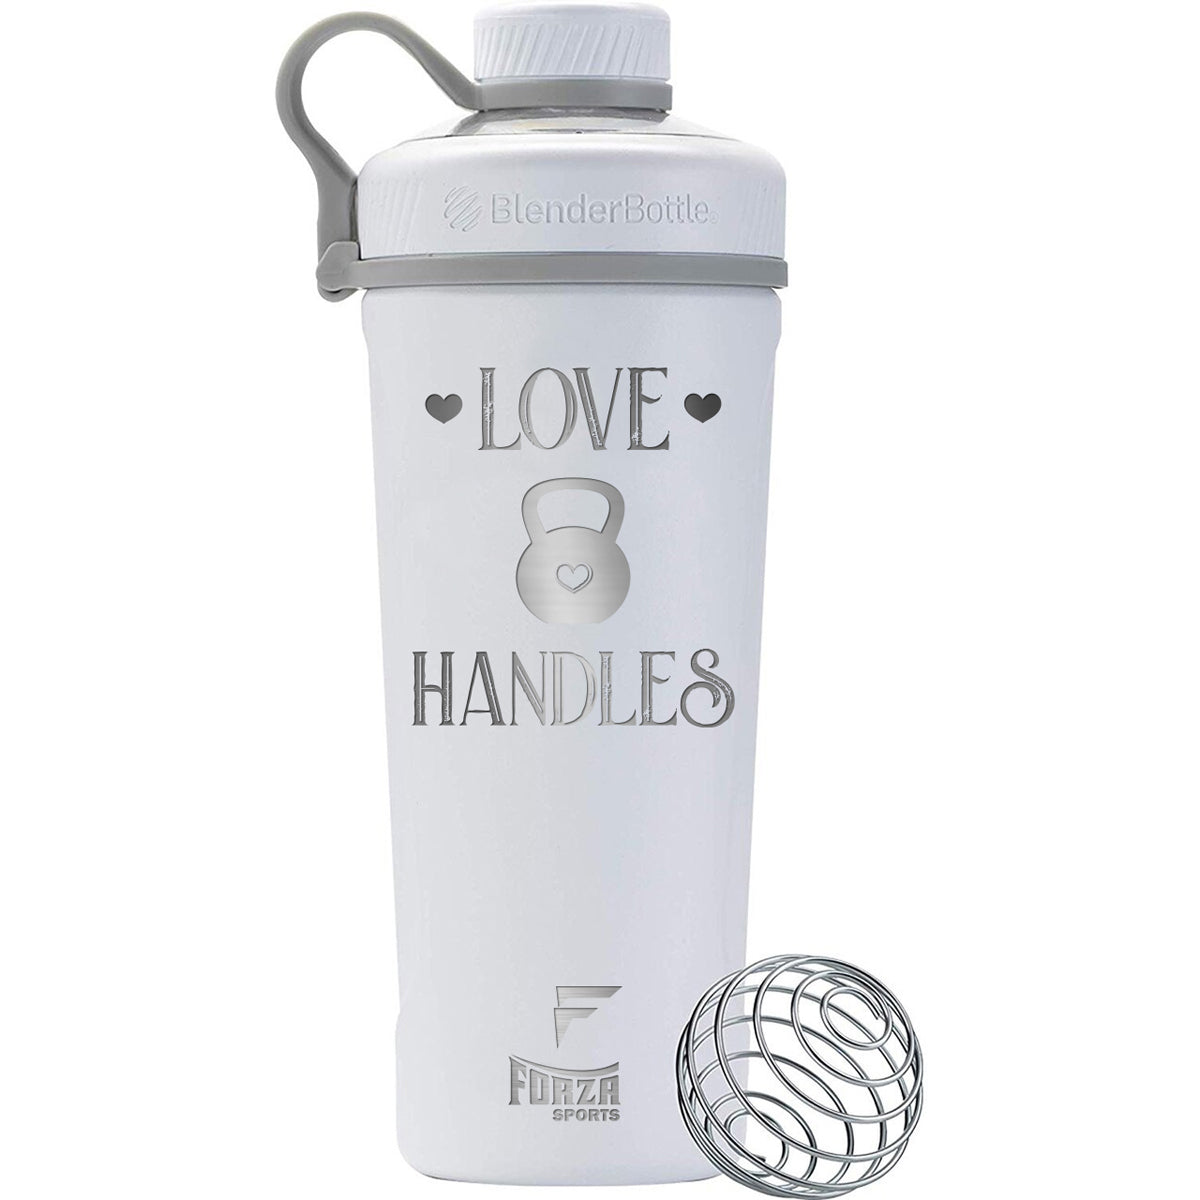 Blender Bottle x Forza Sports Radian 26 oz. Insulated Stainless Steel Shaker Cup Forza Sports